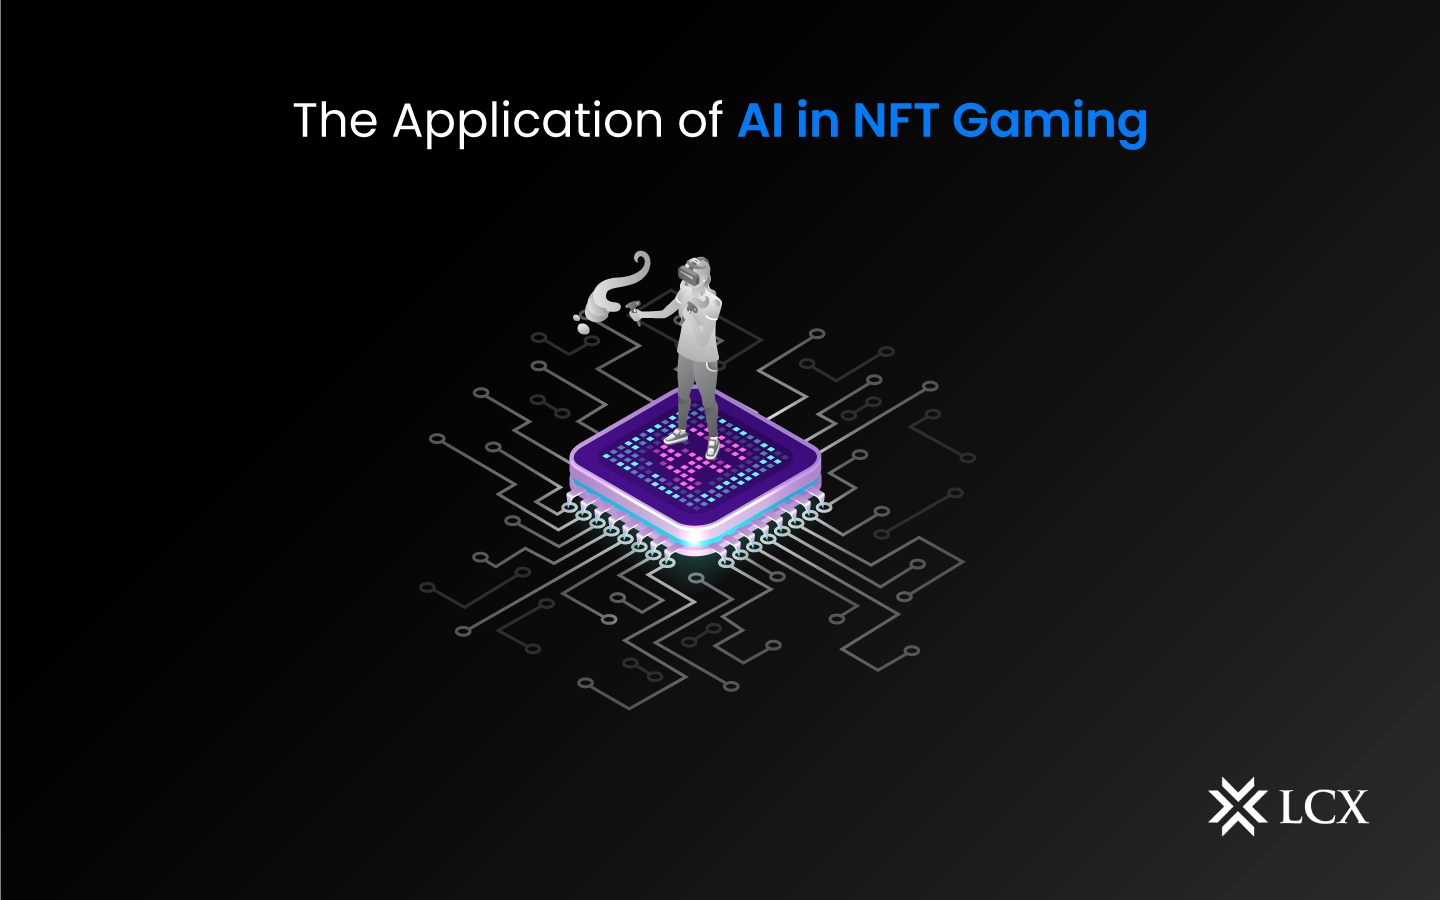 The application of AI in NFT games